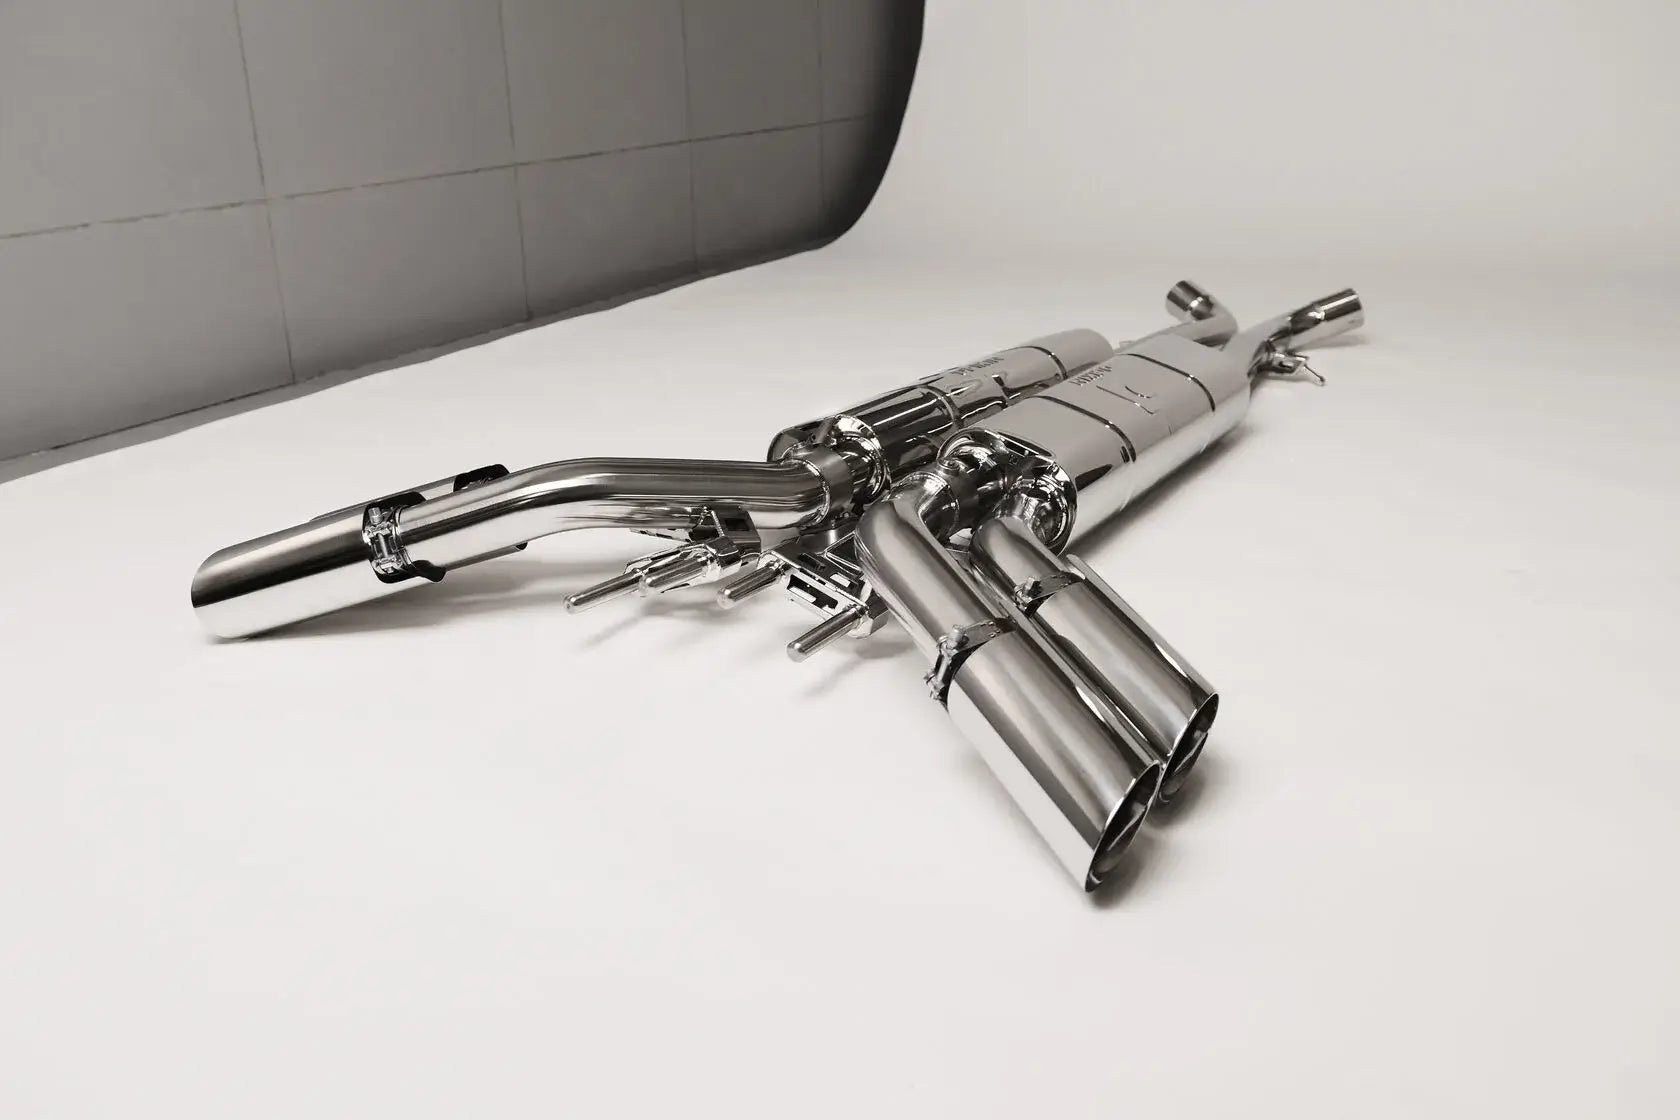 DEIKIN 10-MB-G63.W464-ES-SS-01 Exhaust system Stainless steel for Mercedes-AMG G63 W464 Polished steel Photo-0 